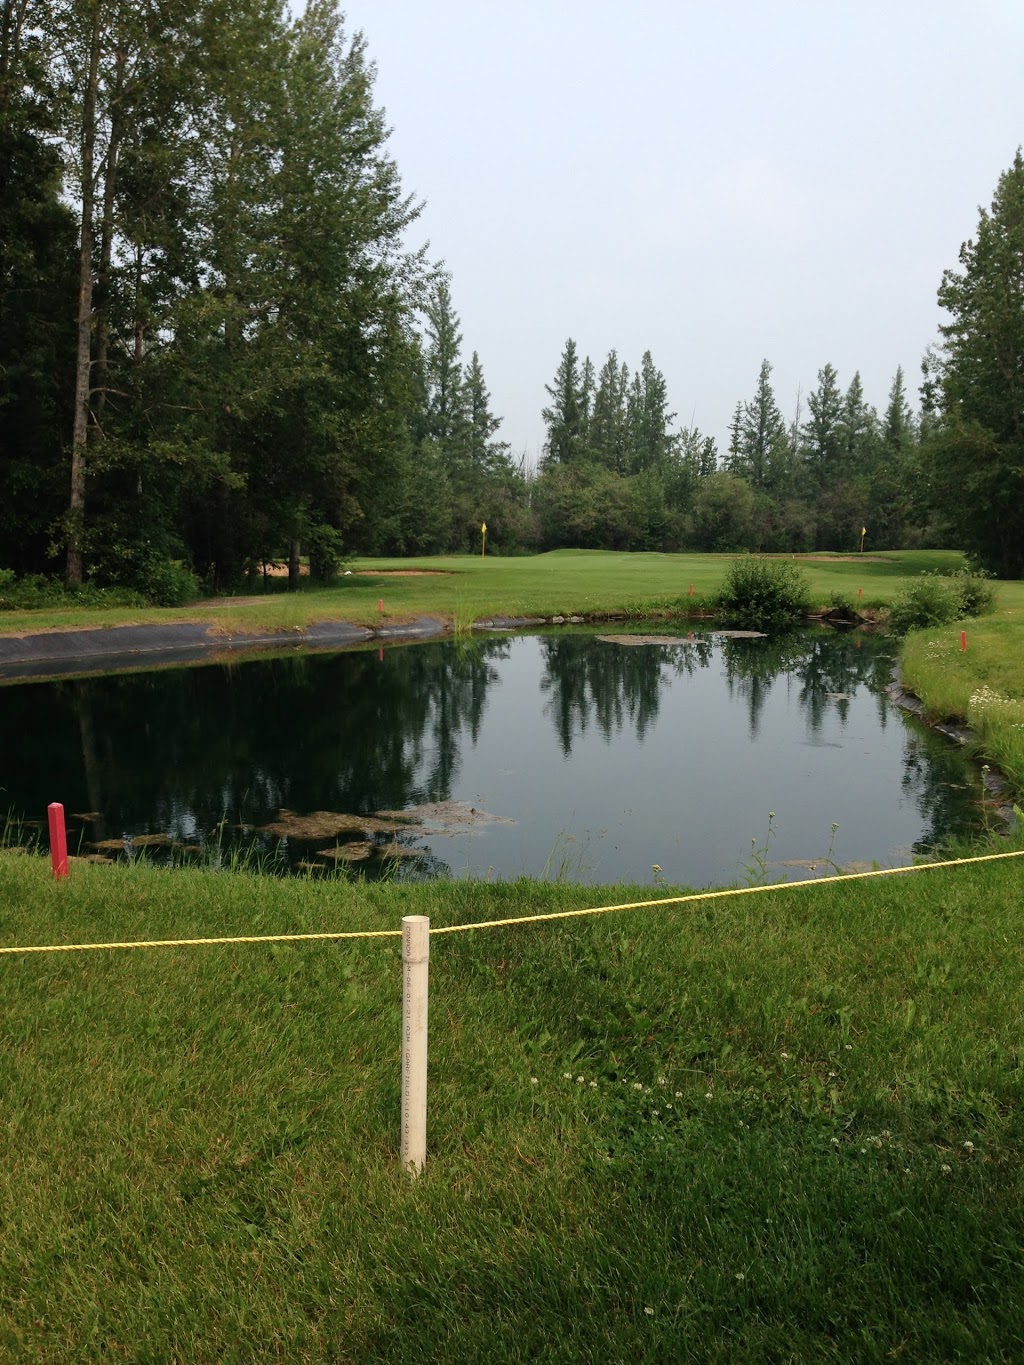 Smoky Lake Golf Course & RV Park | campground | 17340 Township Rd 594, Smoky Lake, AB T0A 3C0, Canada | 7806562121 OR +1 780-656-2121